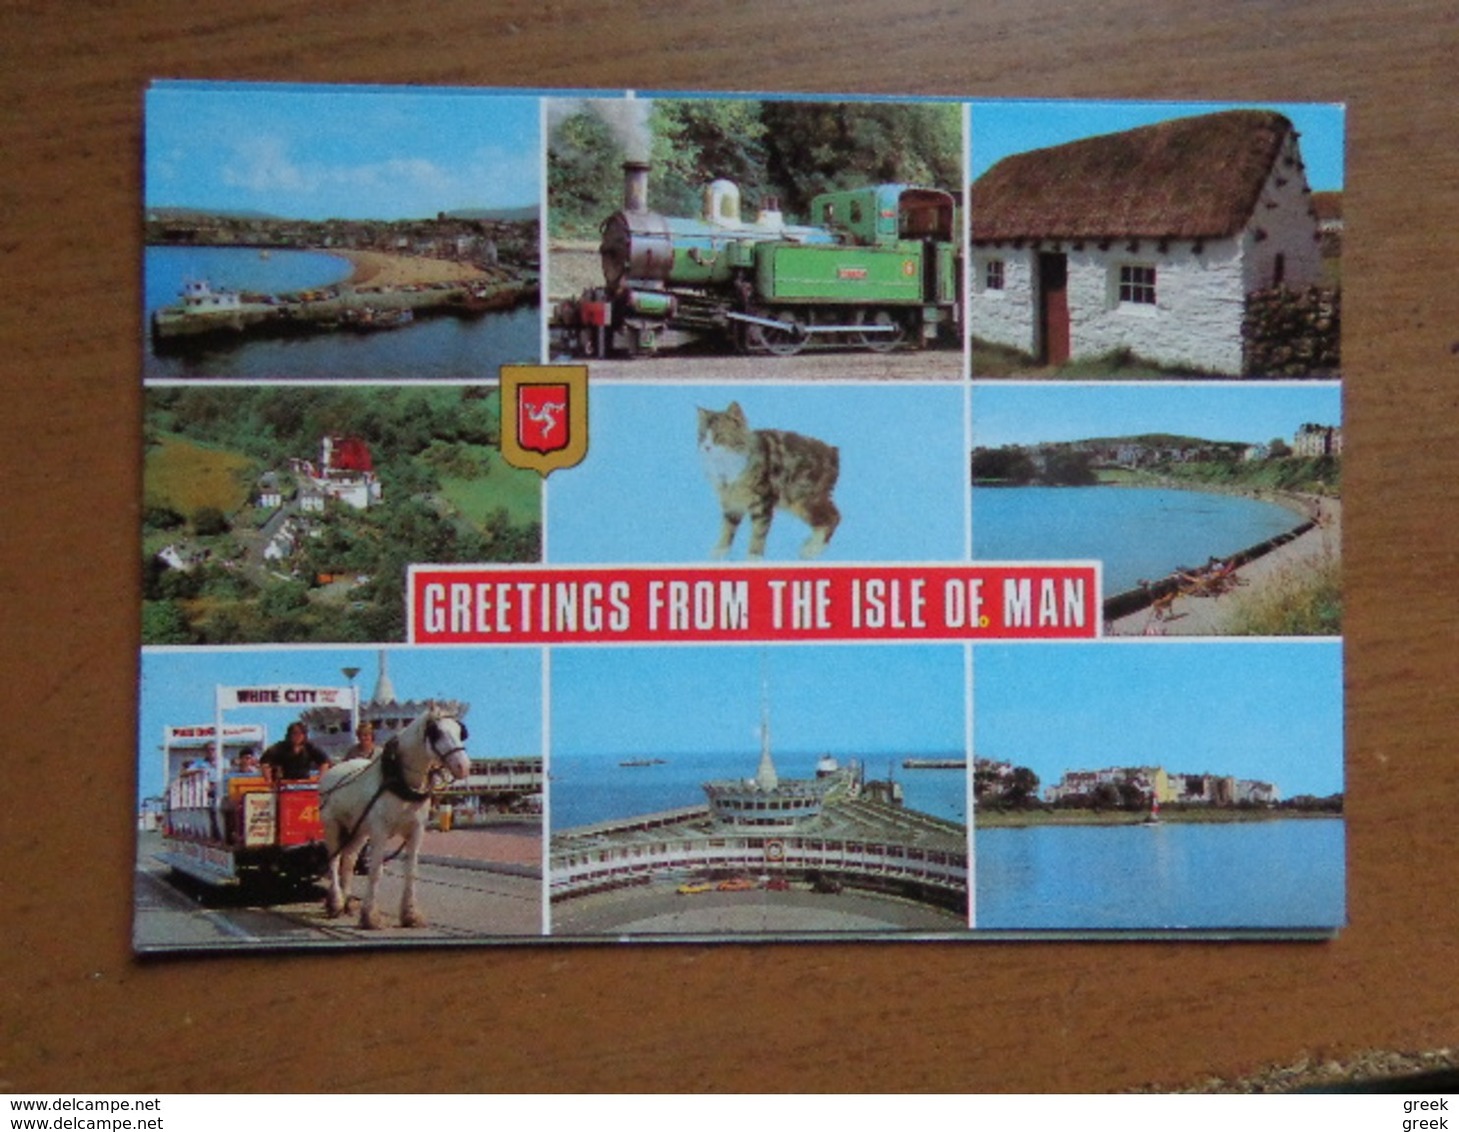 28 cards of ISLE OF MAN (see pictures)